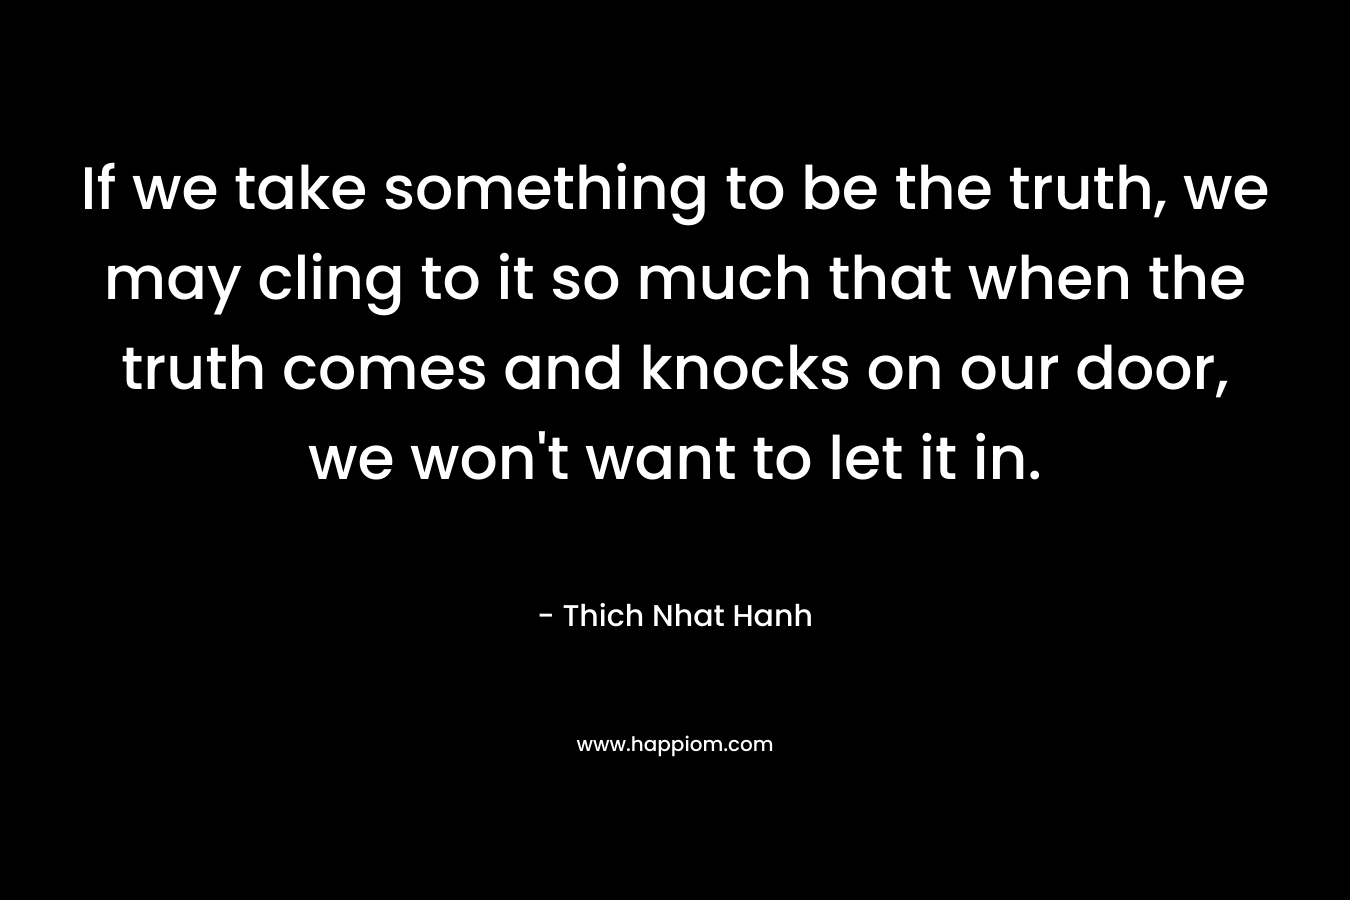 If we take something to be the truth, we may cling to it so much that when the truth comes and knocks on our door, we won’t want to let it in. – Thich Nhat Hanh